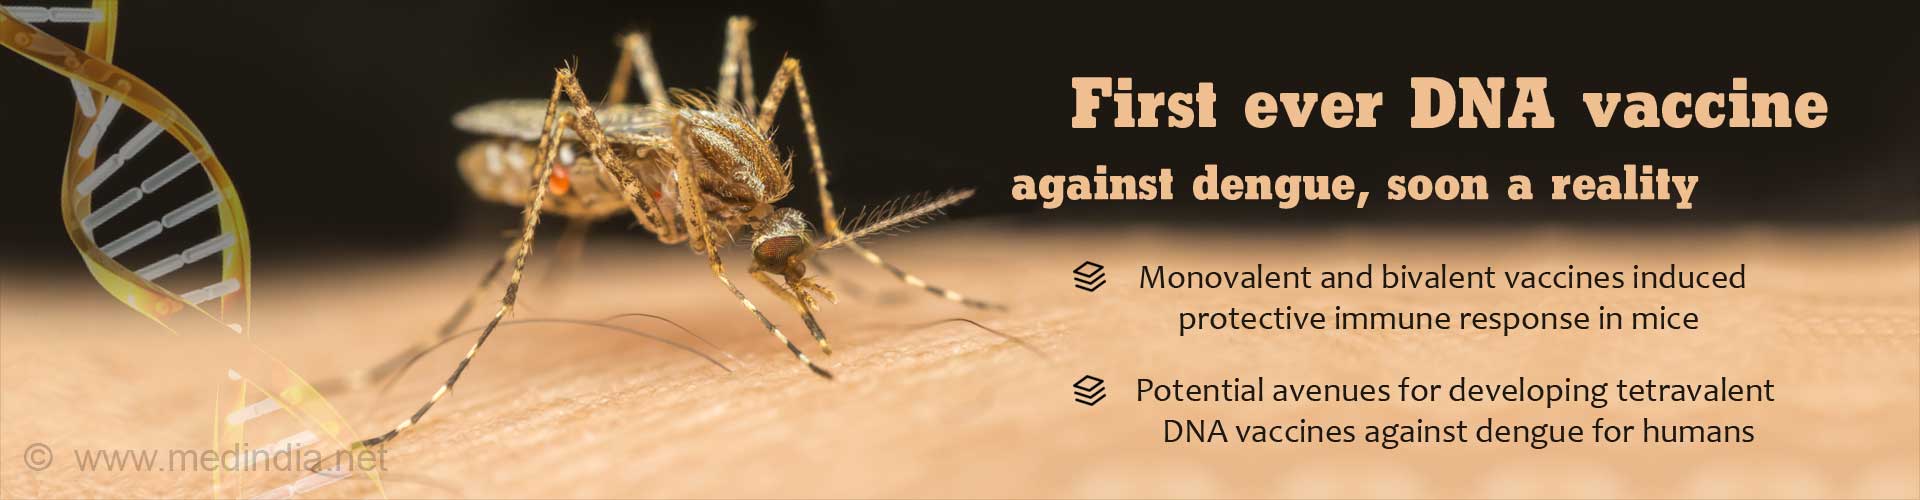 First ever DNA vaccine against dengue, soon a reality
- Monovalent and bivalent vaccines induced protective immune response in mice
- Potential avenues for developing tetravalent DNA vaccines against dengue for humans